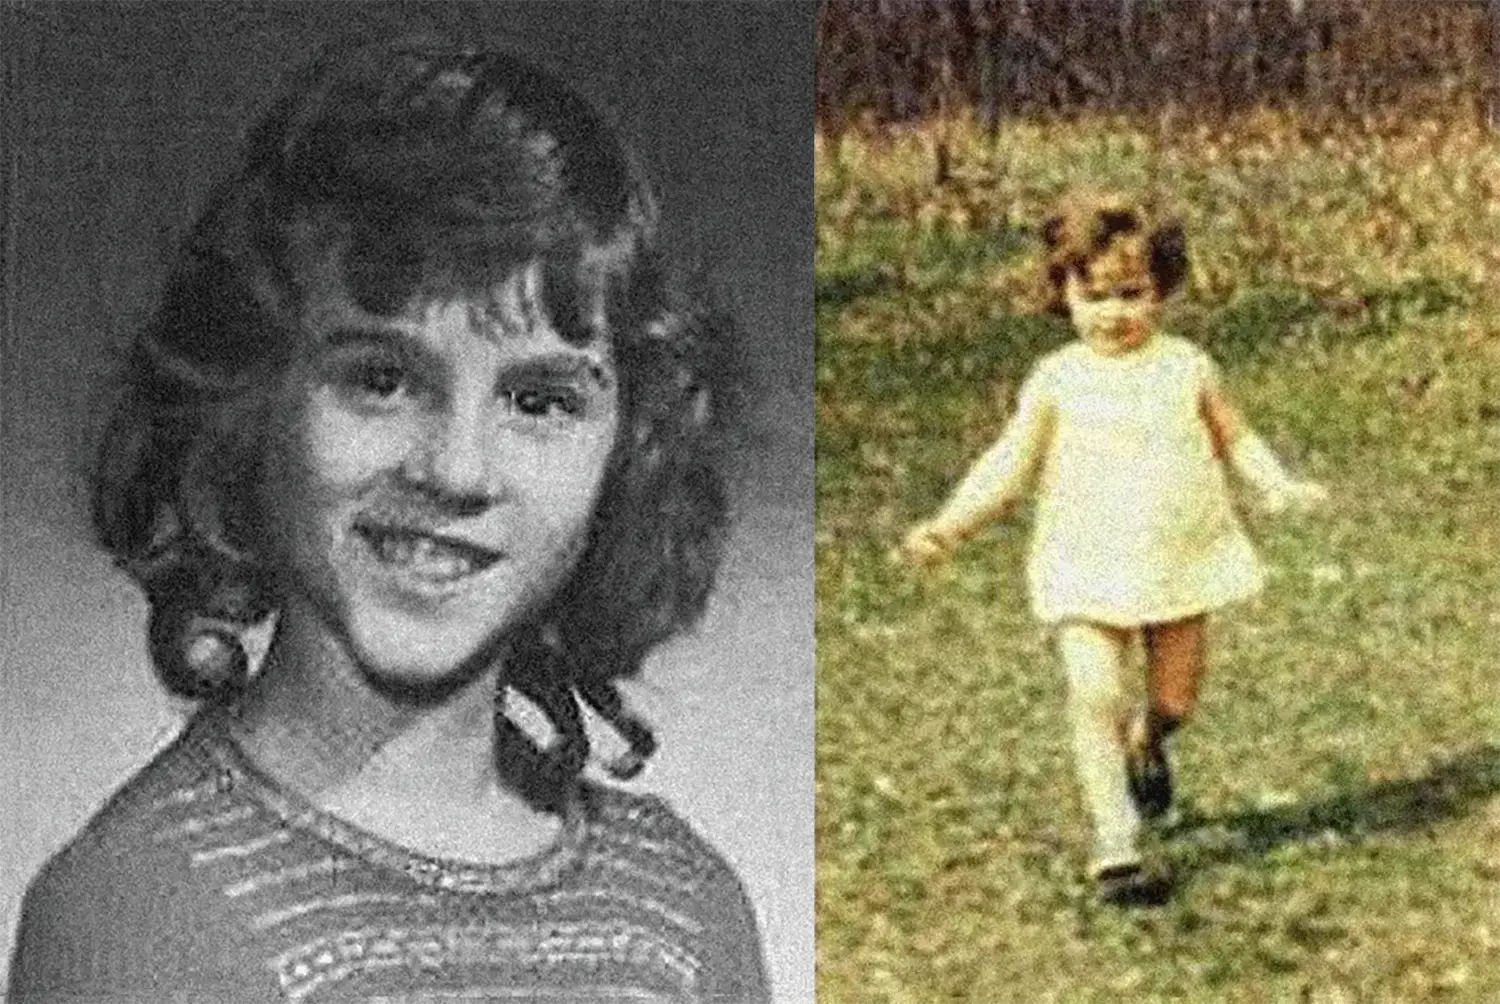 Two photographs. One of a studio portrait of young Brenda with shoulder-length hair. The other is a toddler in a dress, walking on a grassy lawn.